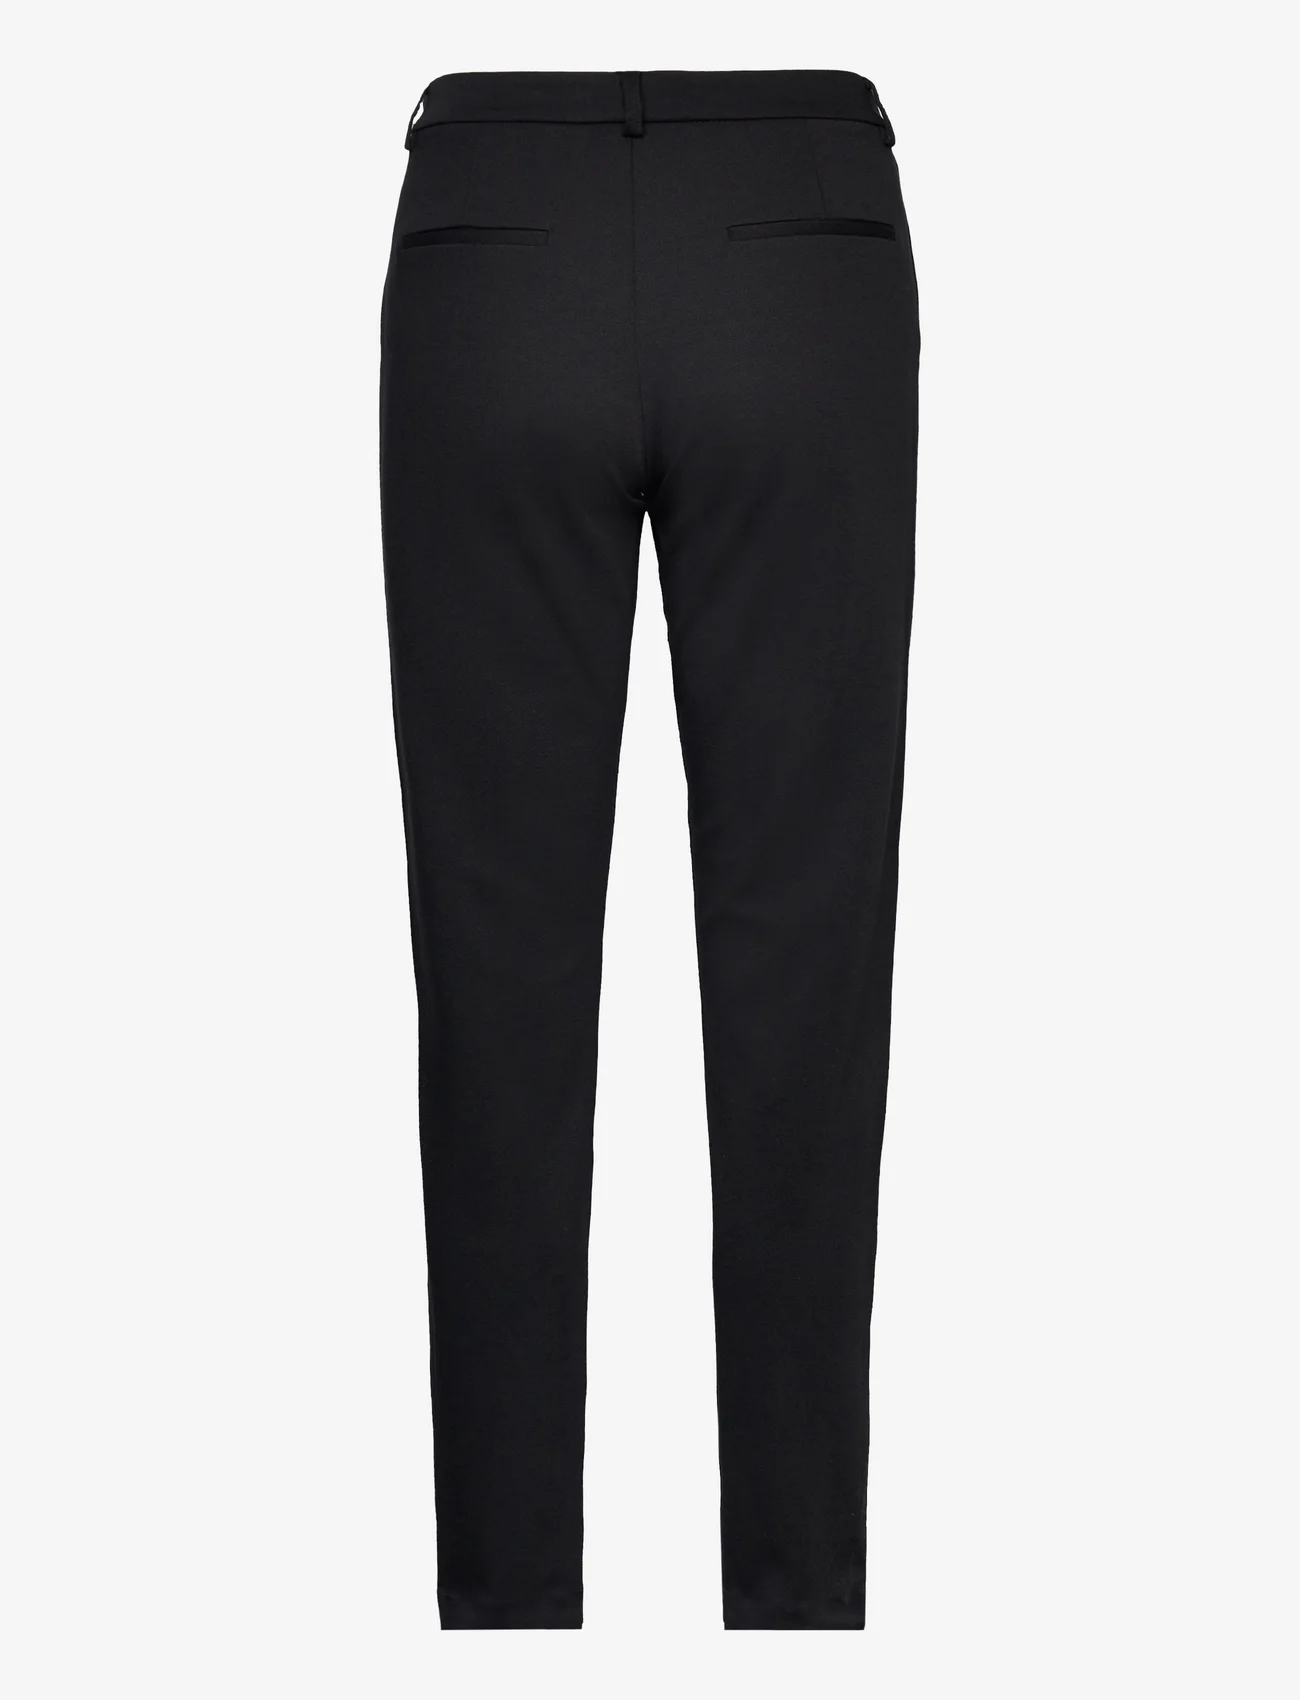 FREE/QUENT - FQNANNI-PANT - kostymbyxor - black - 1